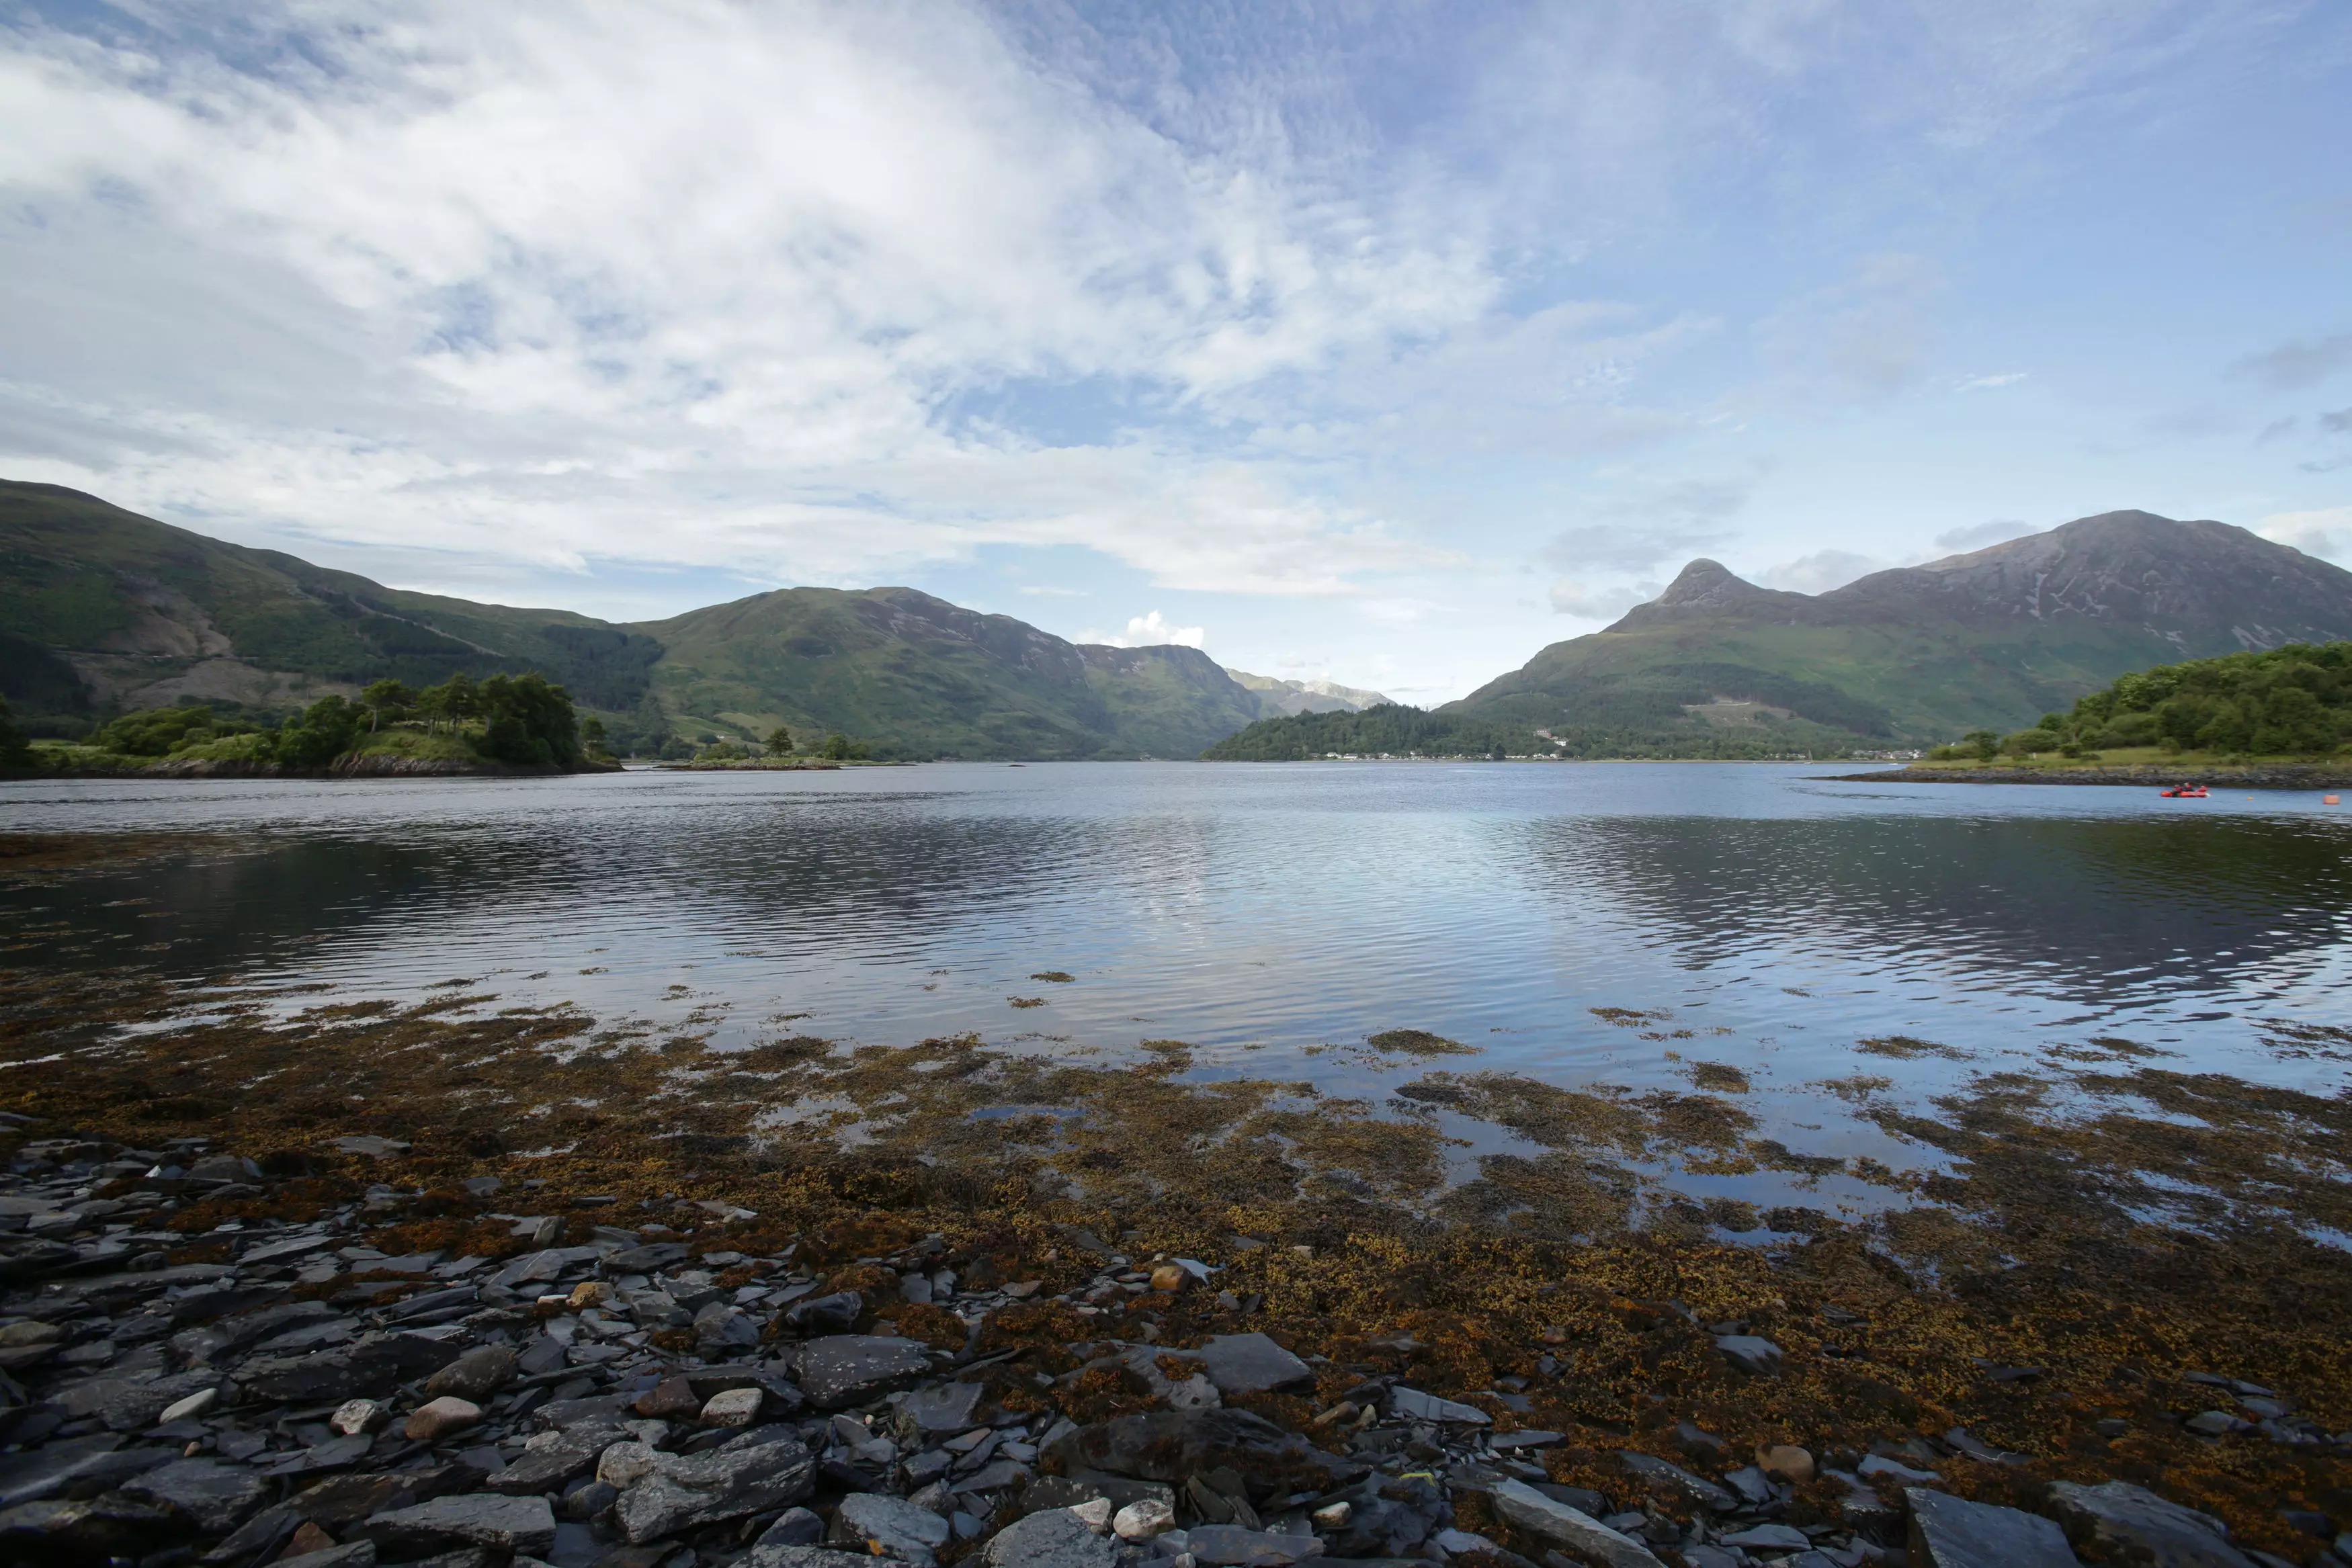 Loch Leven and the mountains around Ballachulish, Scotland (